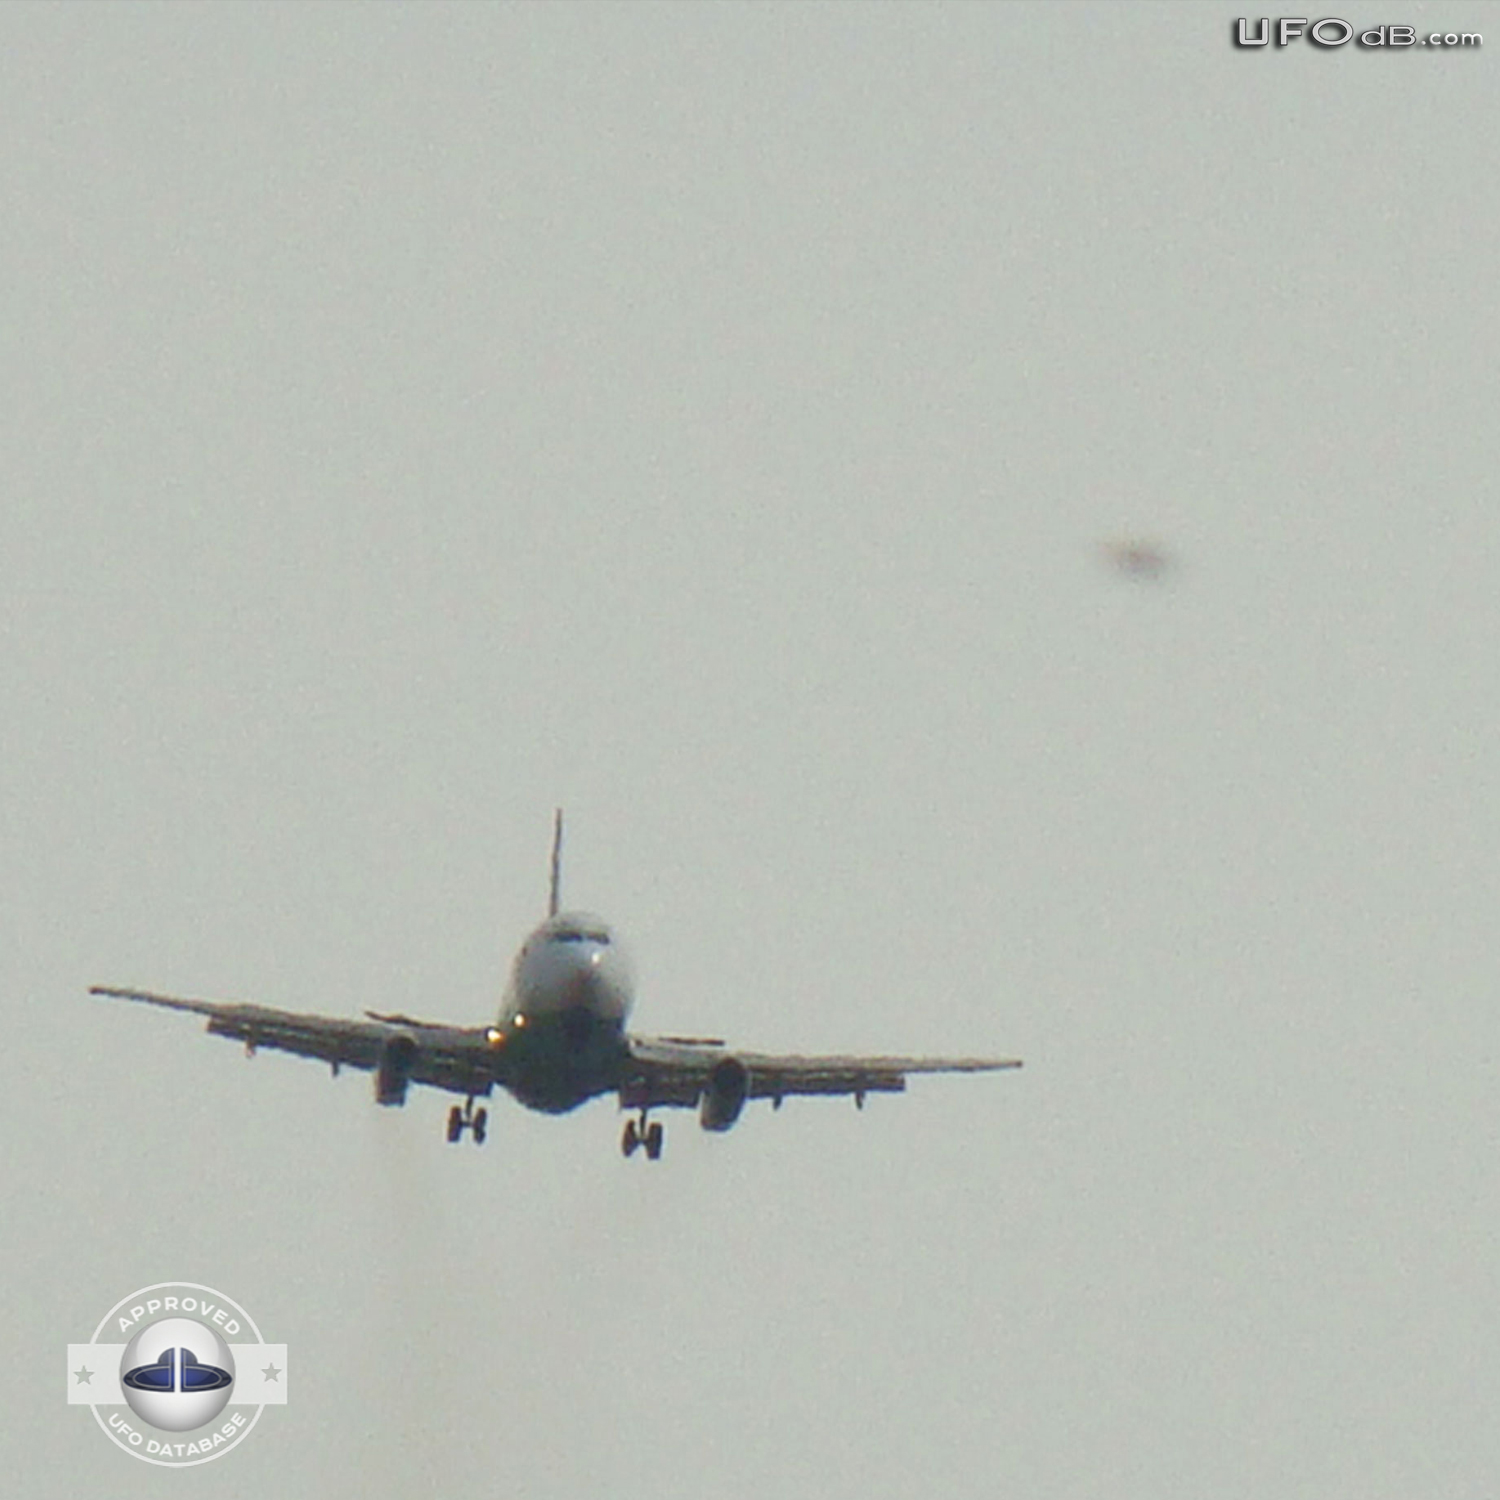 Witness near Maracaibo Airport takes a picture of a UFO near Airplane UFO Picture #351-1